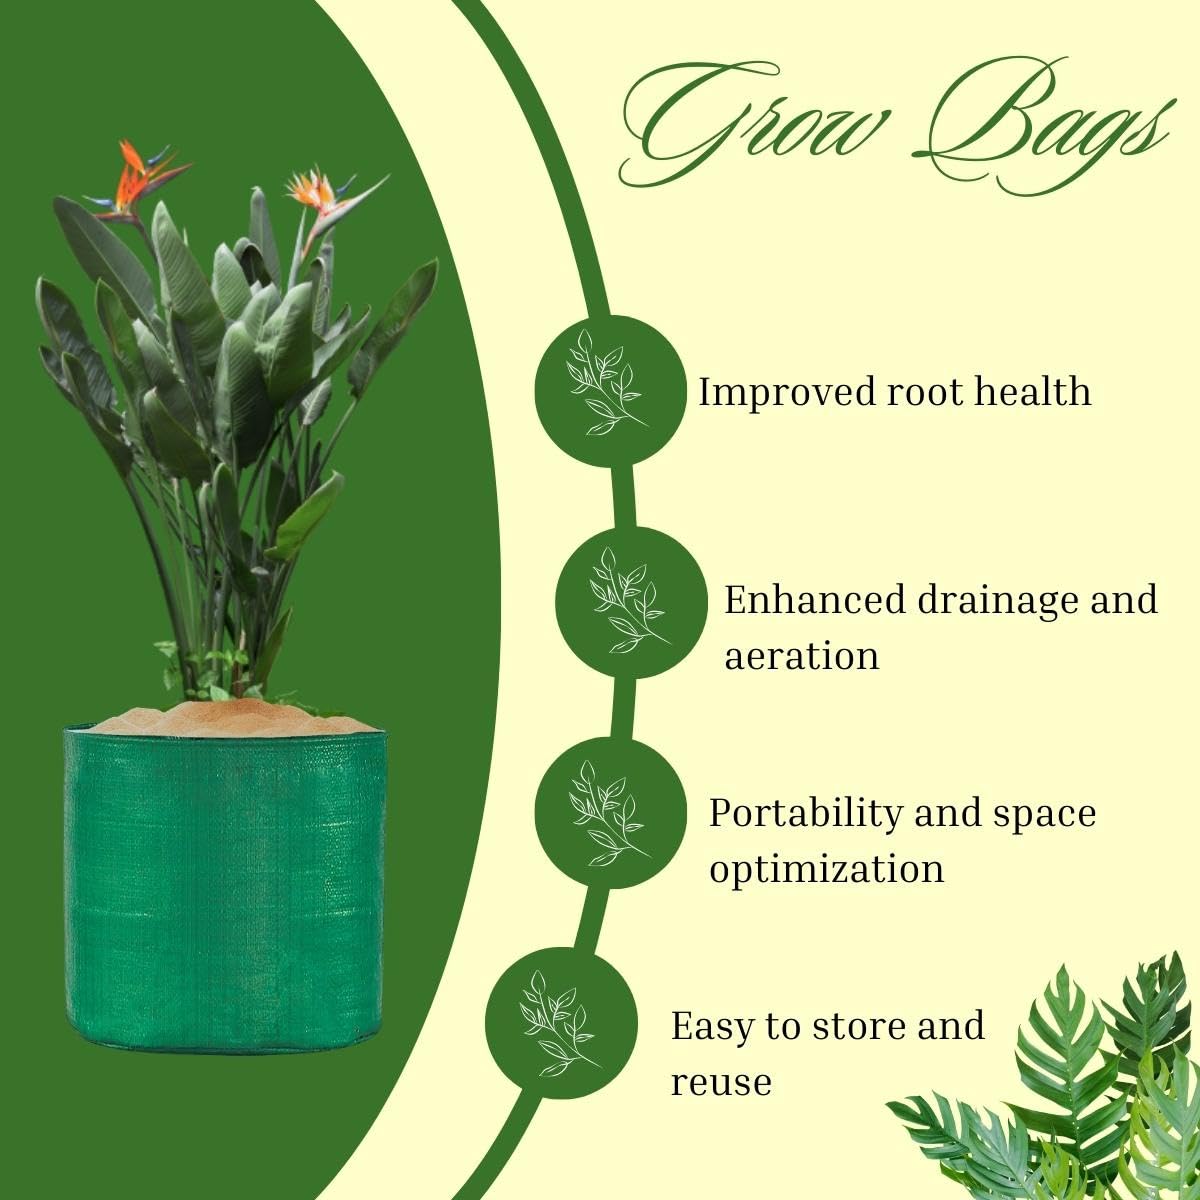 SINGHAL HDPE UV Protected Round Plants Grow Bags 9x9 Inch Pack of 20, Green Colour Suitable for Terrace and Vegetable Gardening